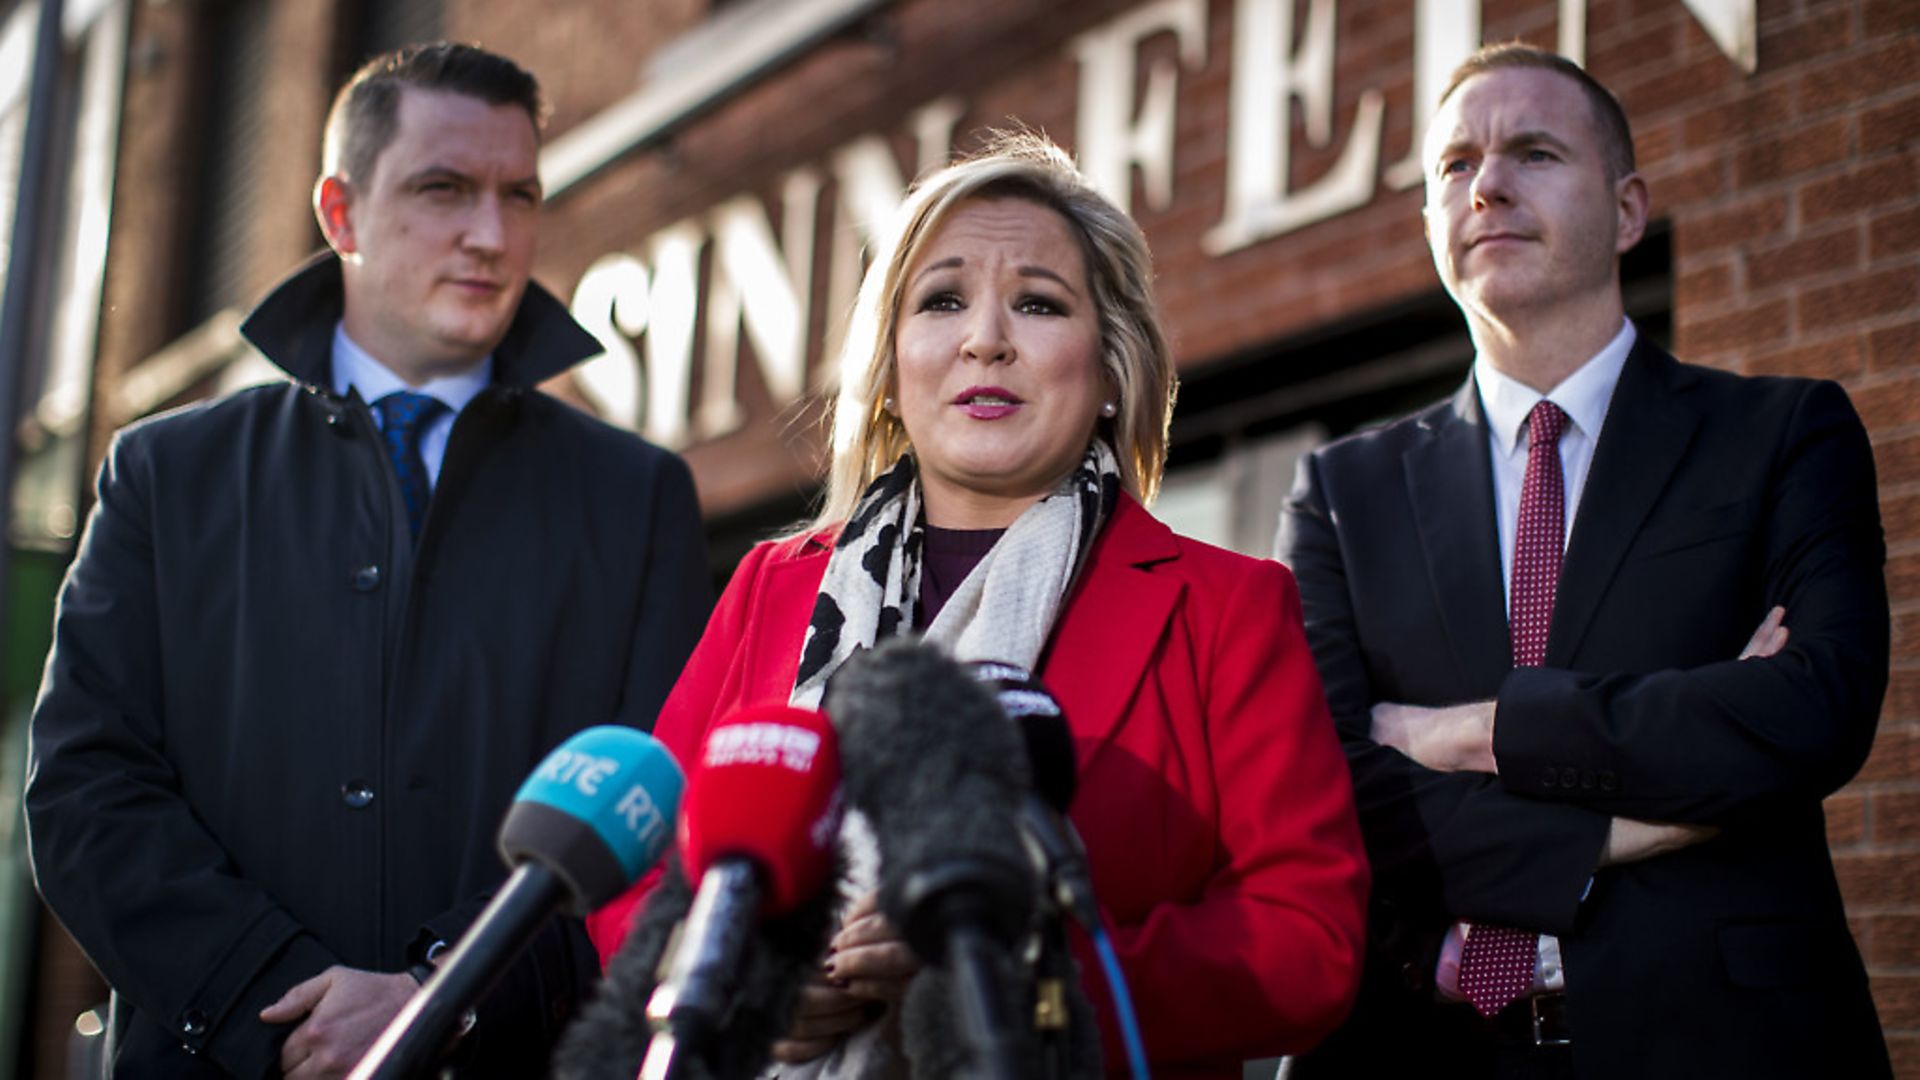 Sinn Fein Vice President Michelle ONeill with party colleagues John Finucane (left) and Chris Hazzard (right). Photograph: Liam McBurney/PA Wire. - Credit: PA